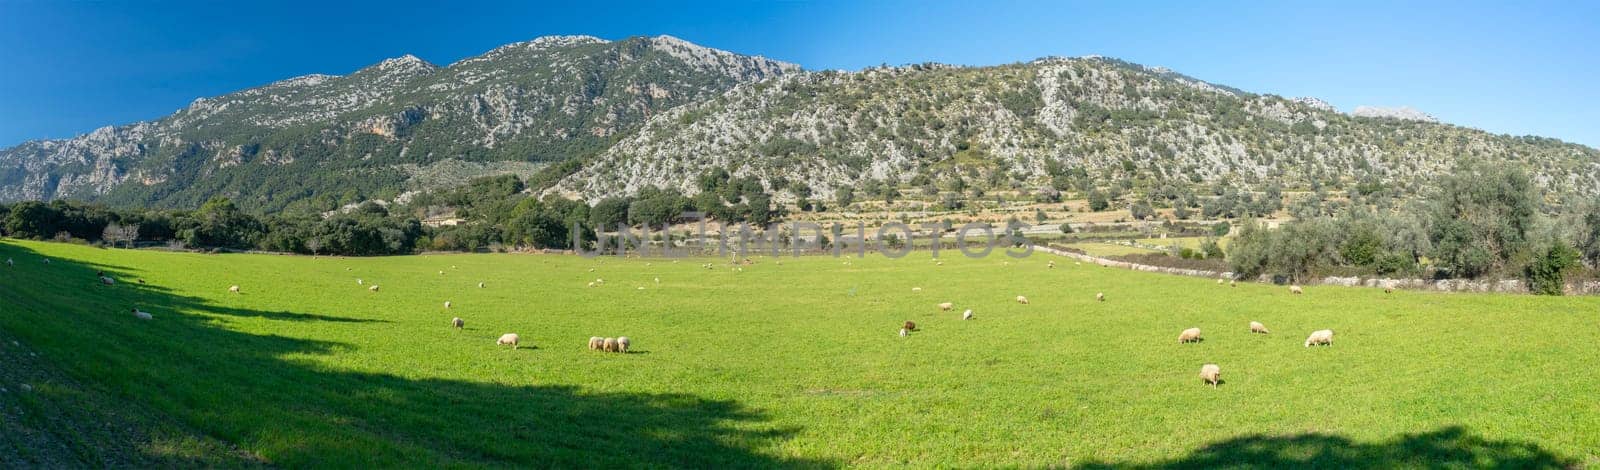 Lush green meadows of Orient, Mallorca unfold beneath a majestic mountain range, dotted with grazing sheep under the Mediterranean sun. The rural landscape, partitioned by stone walls, exudes a sense of peace and timelessness, embodying the essence of pastoral life